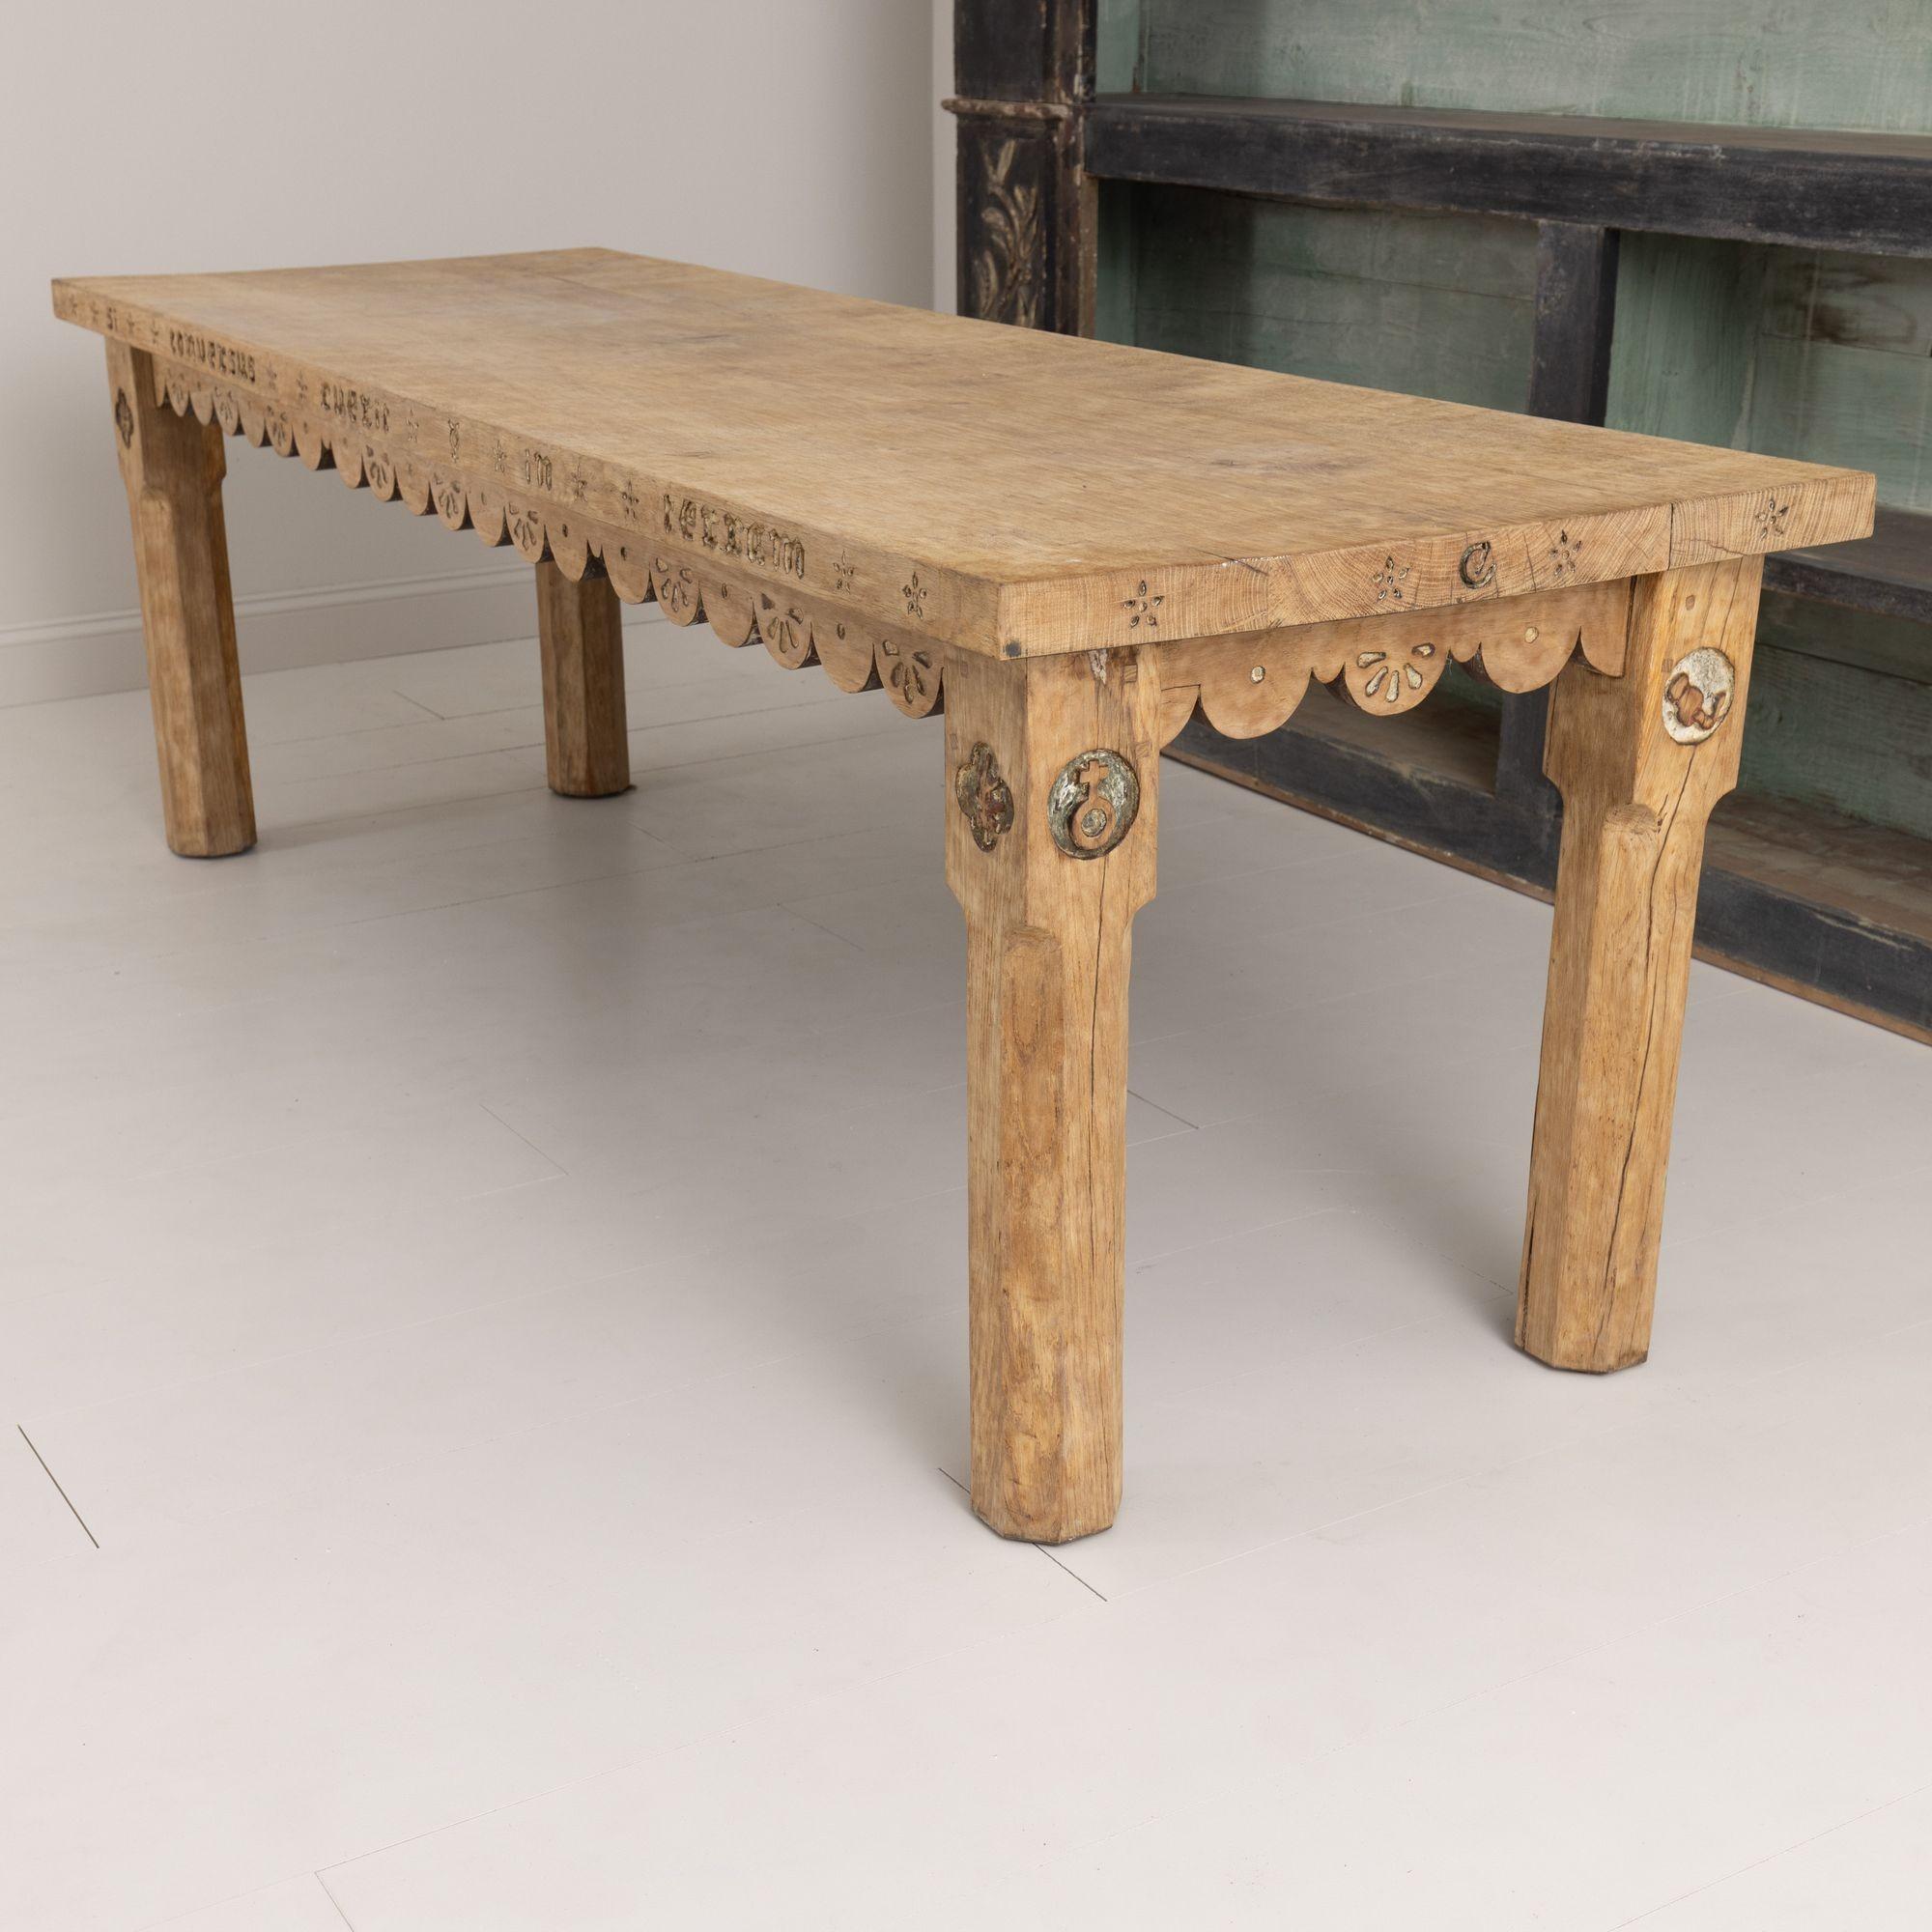 Hand-Carved 19th c. French Oak Farm Table with Scalloped Apron and Latin Carvings